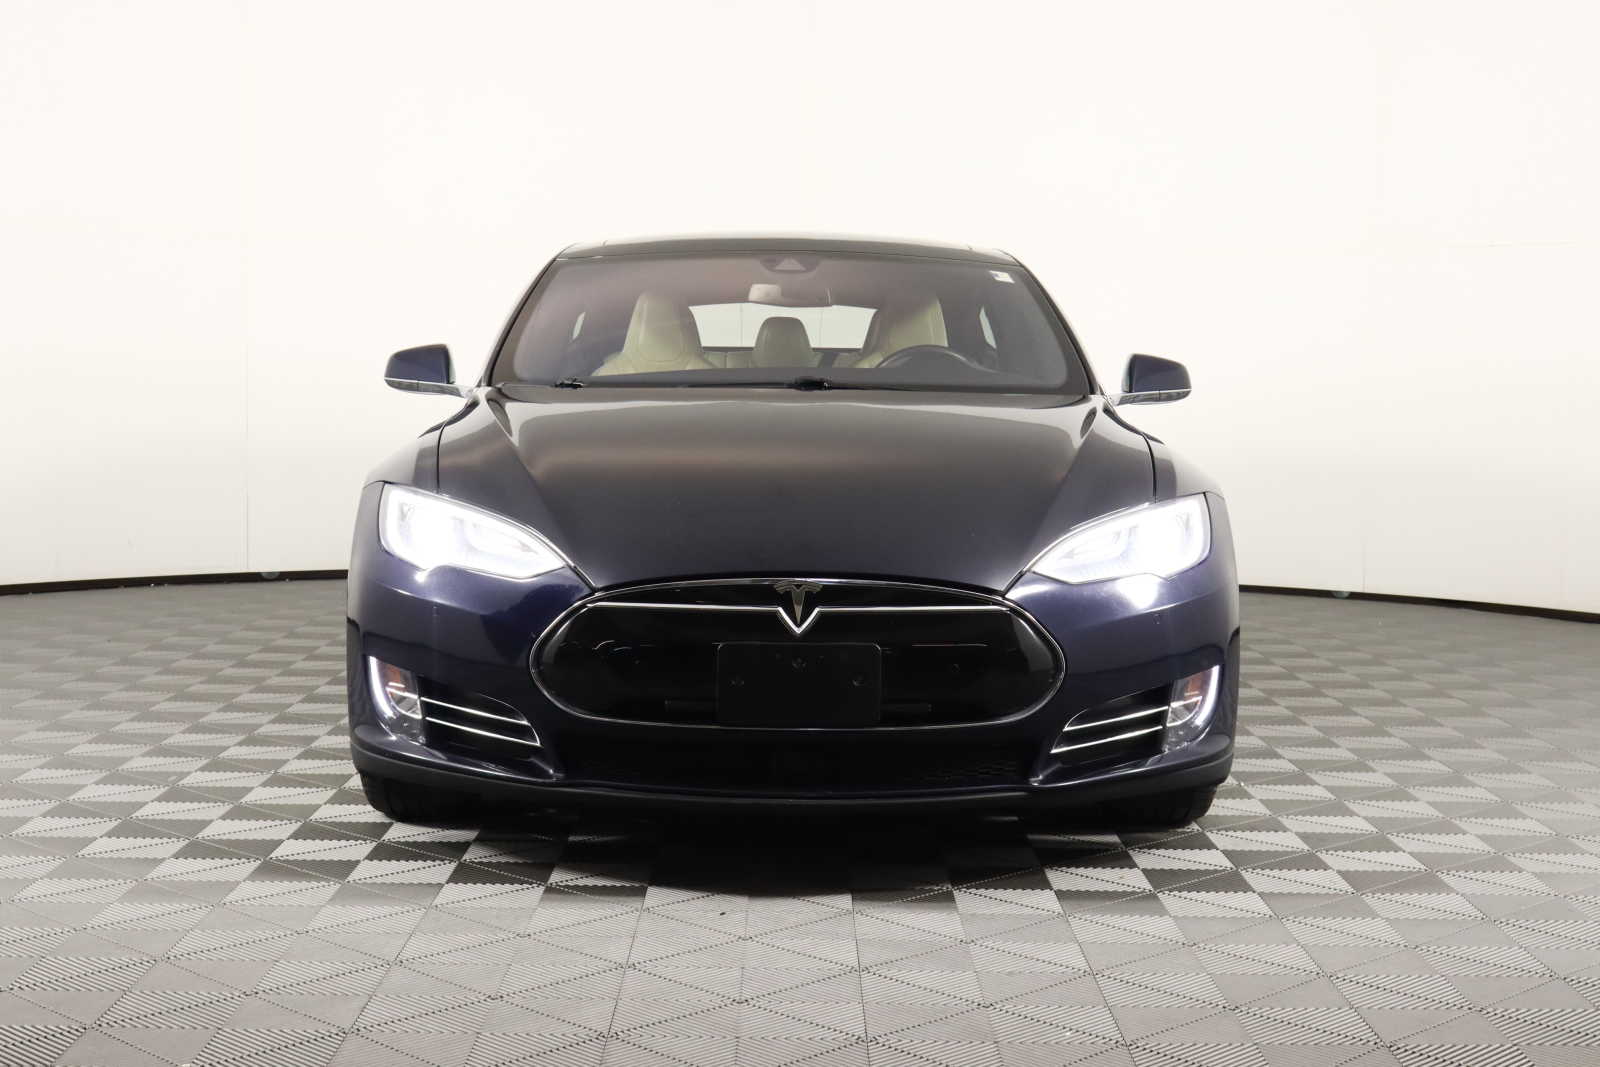 Used 2015 Tesla Model S Performance with VIN 5YJSA1H43FF087440 for sale in Boston, MA